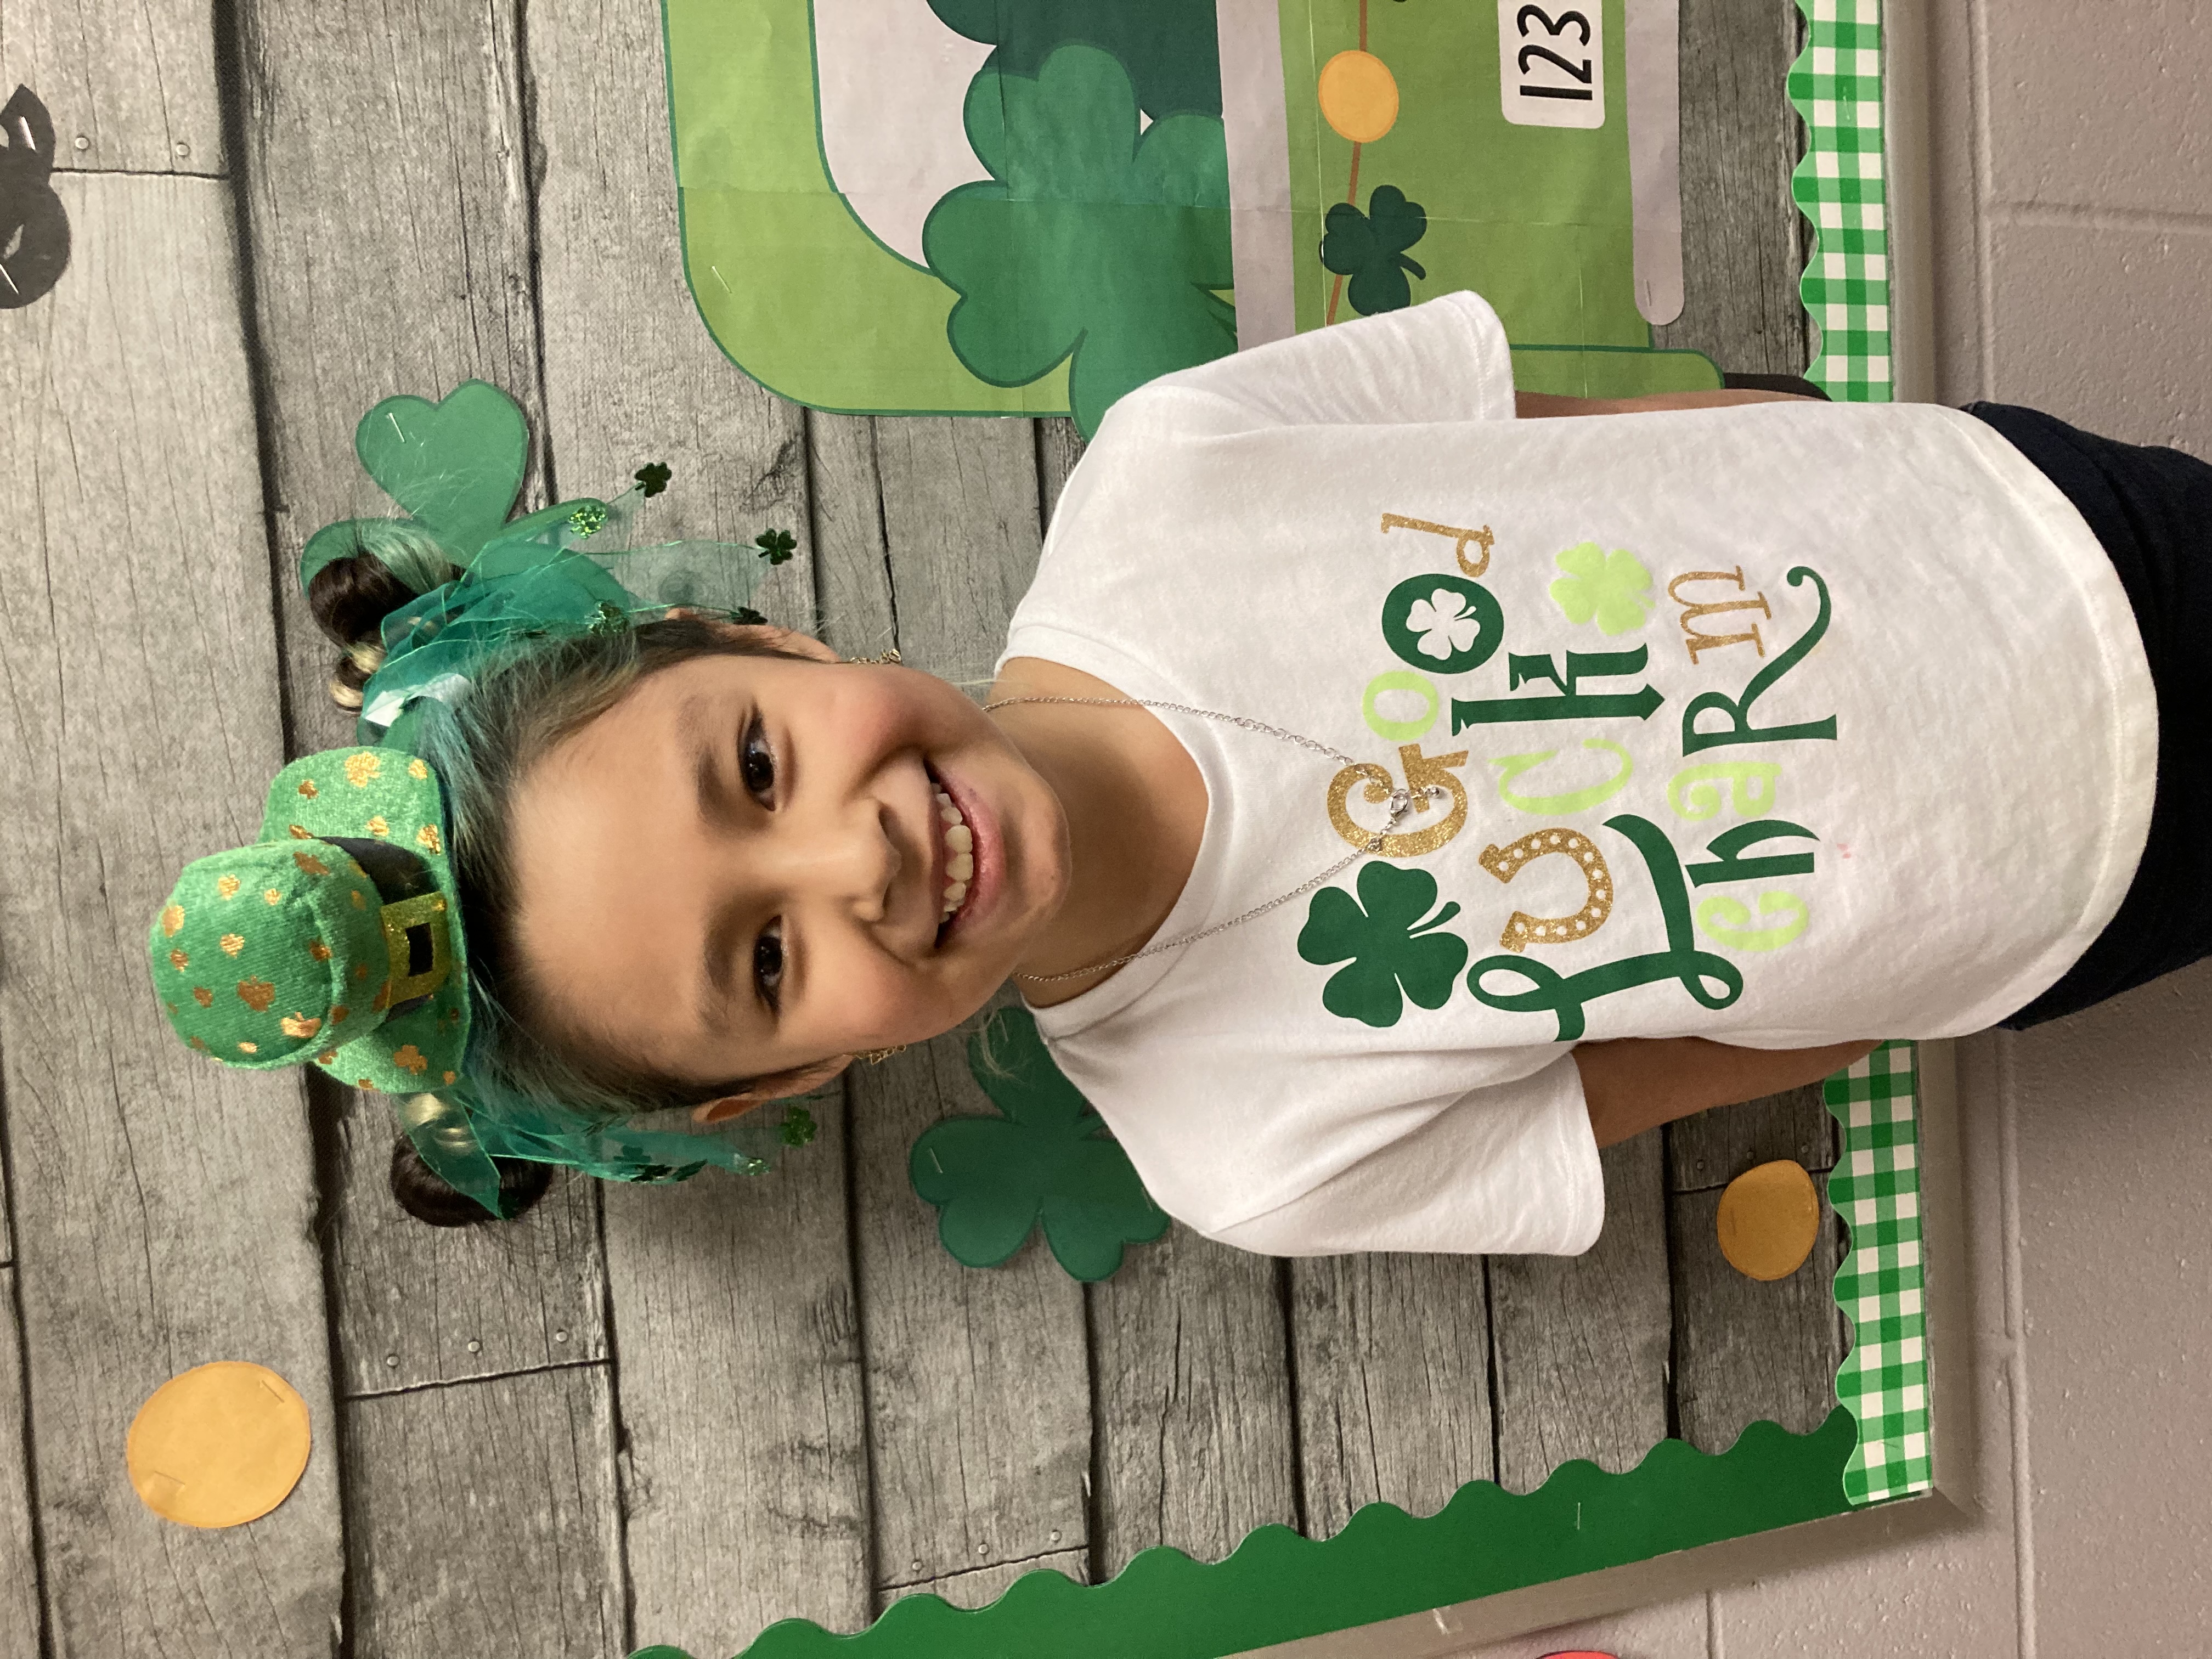 Elementary Student wearing silly St. Patrick's Day hat